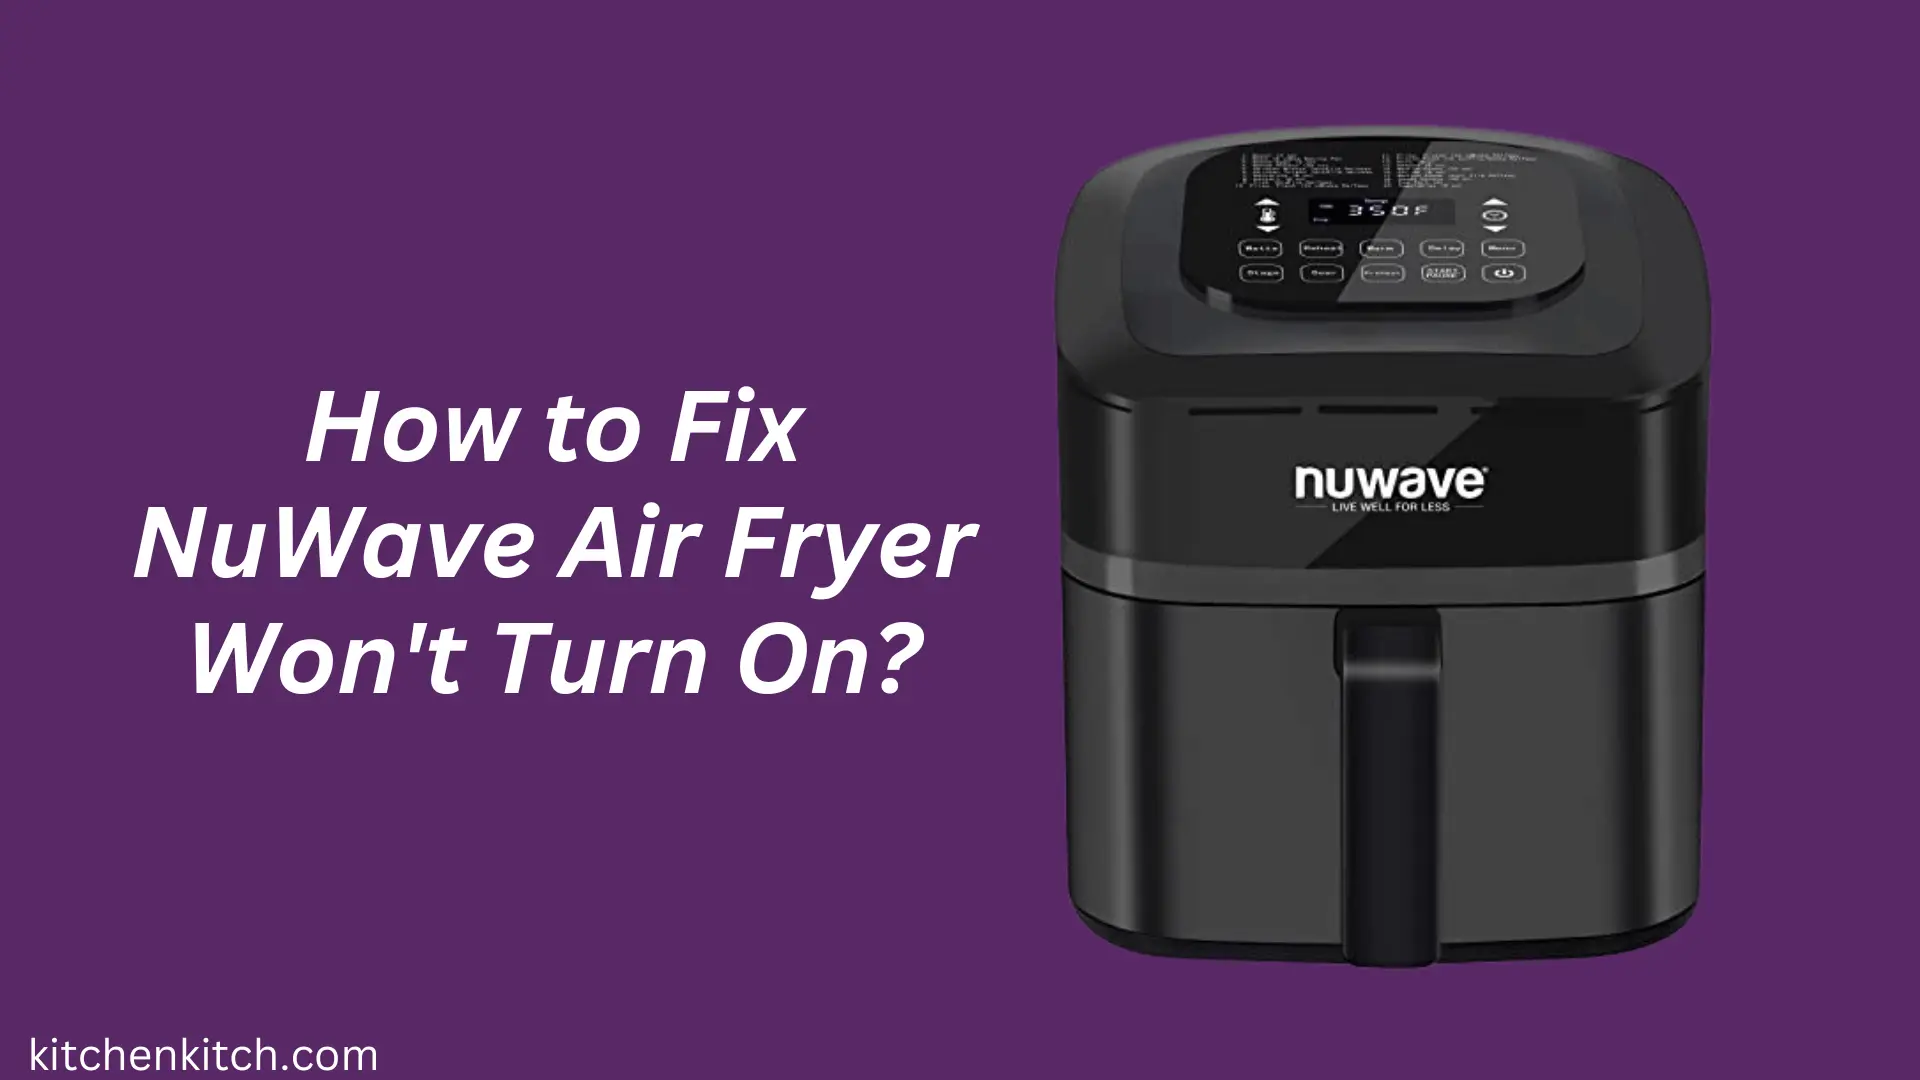 How to Fix NuWave Air Fryer Won't Turn On?